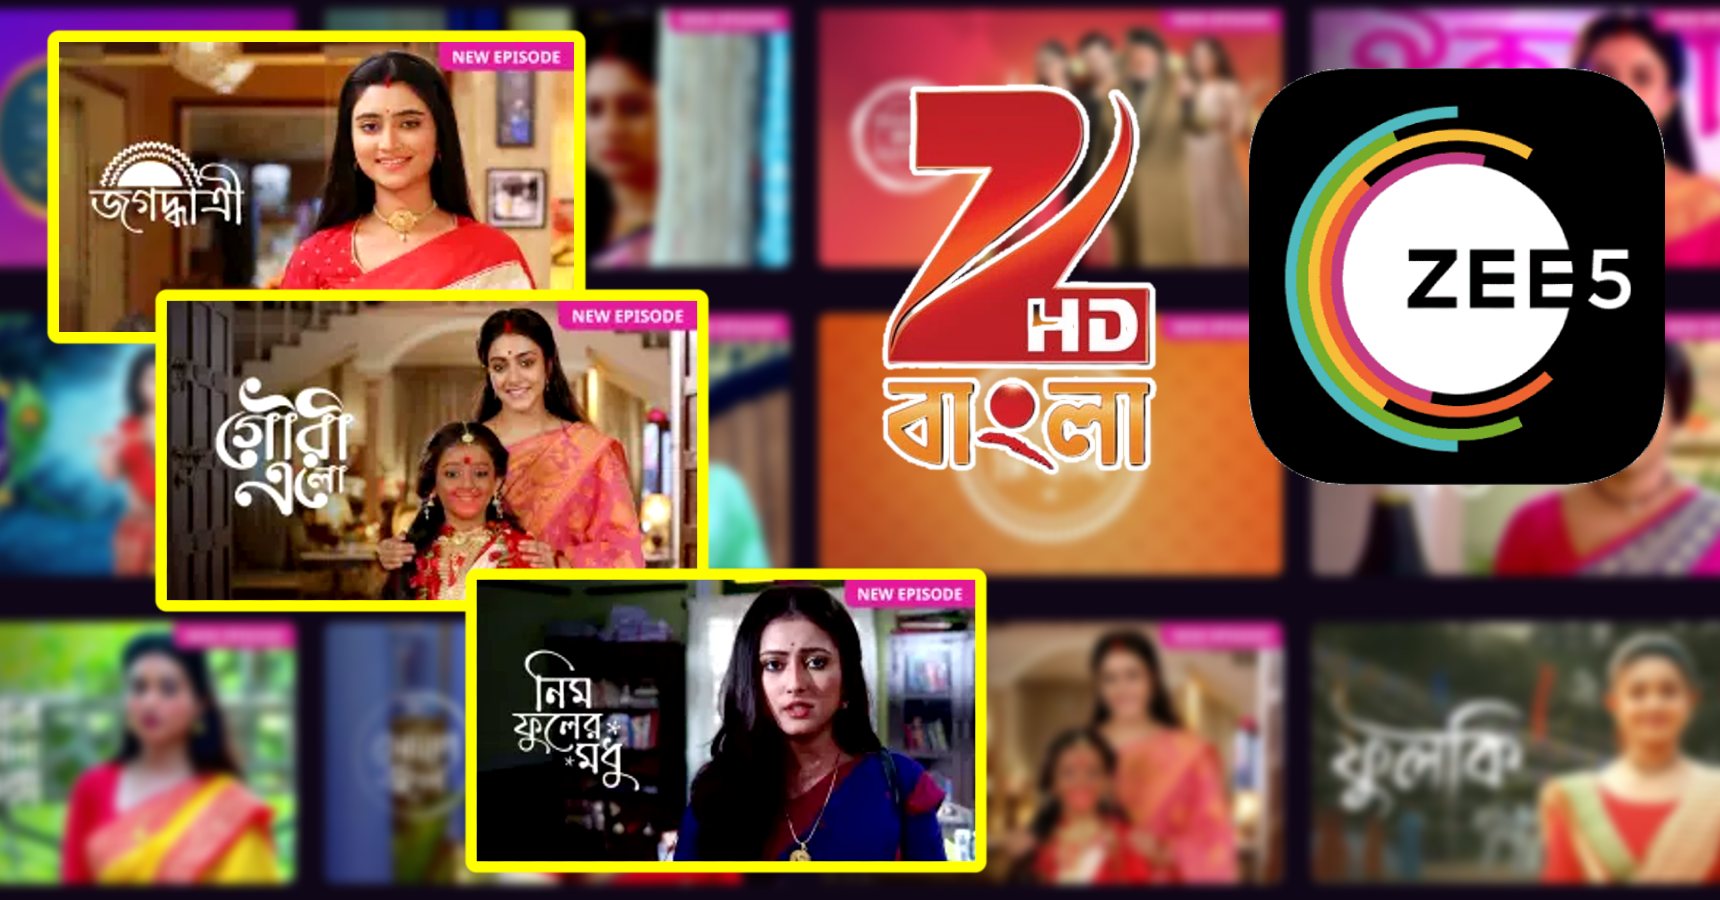 No Free Bengali Serial episodes in Zee5 now have to subscribe to watch